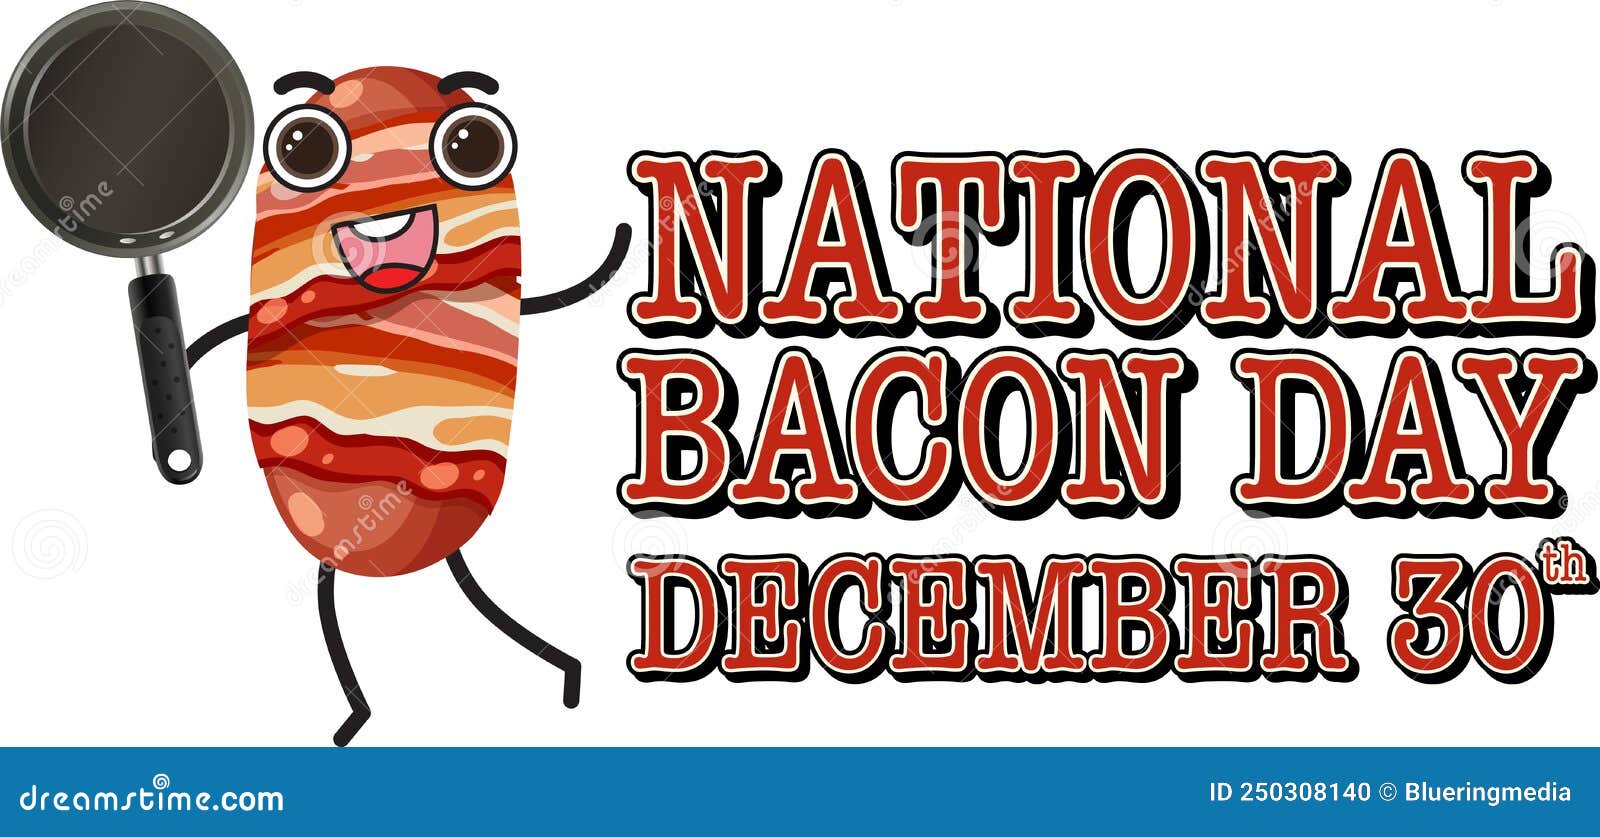 International Bacon Day Poster Template Stock Vector Illustration of